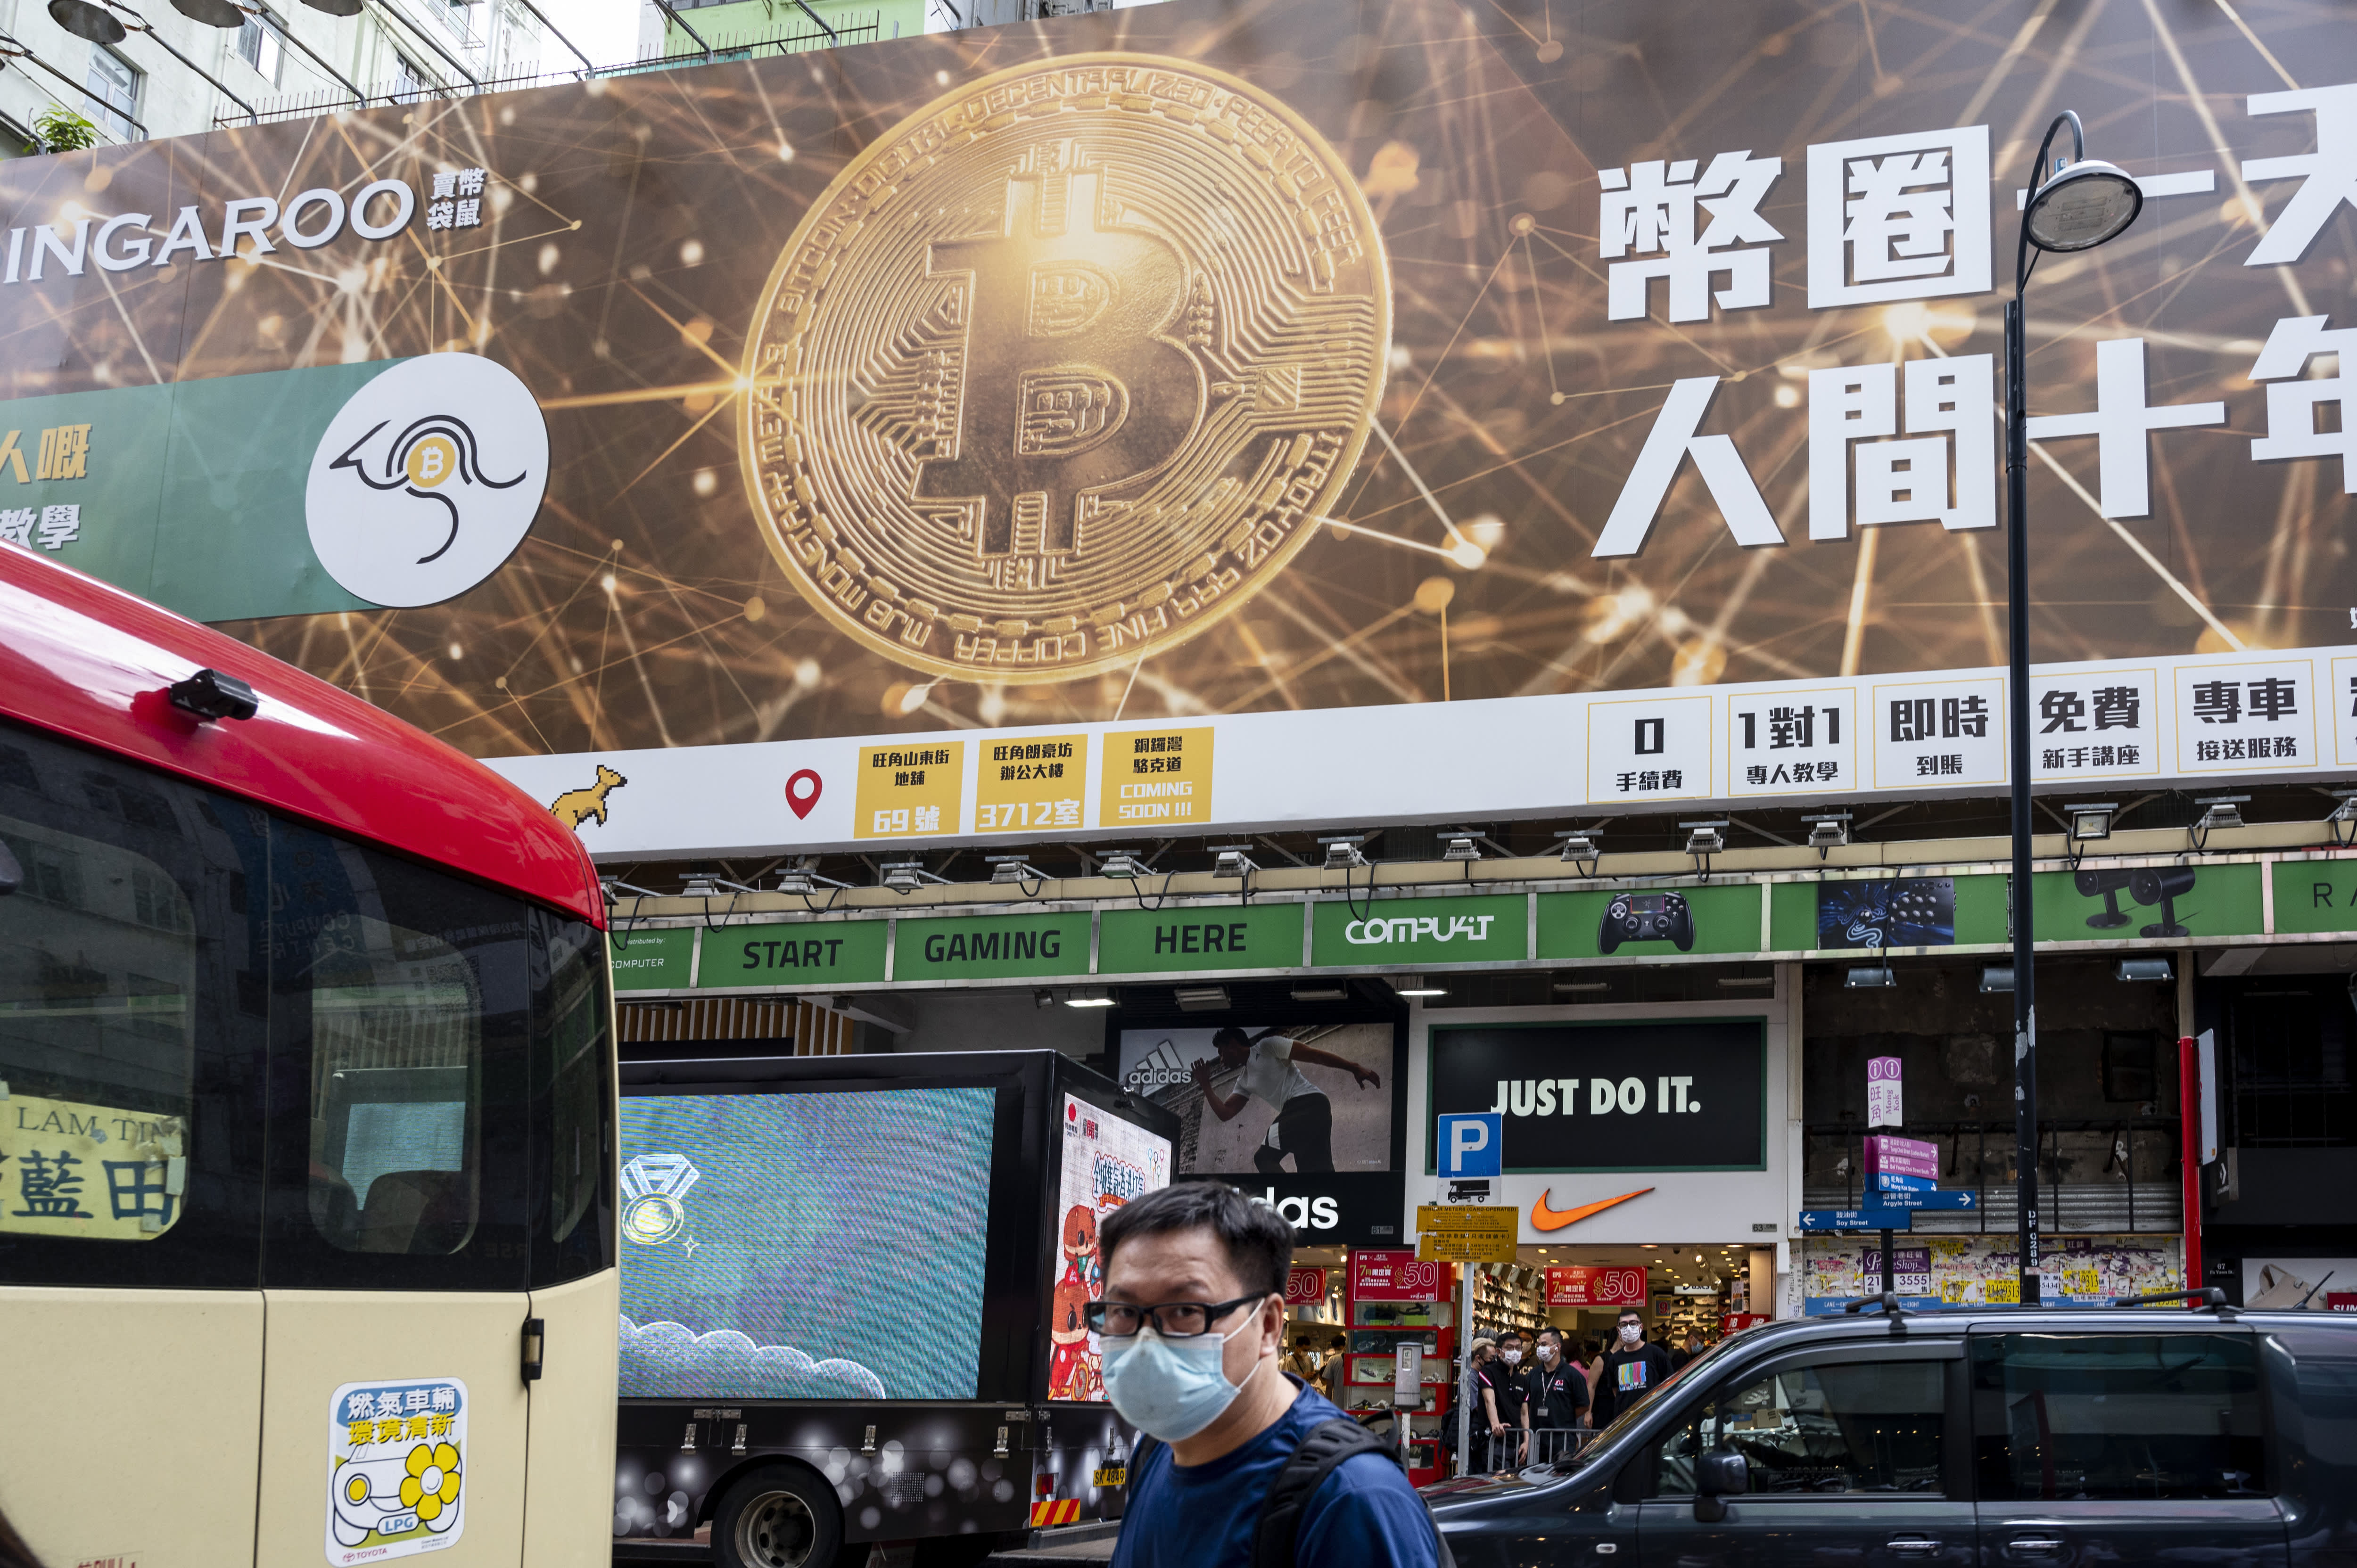 Cryptocurrencies fall on China crackdown. Why traders see opportunity – CNBC